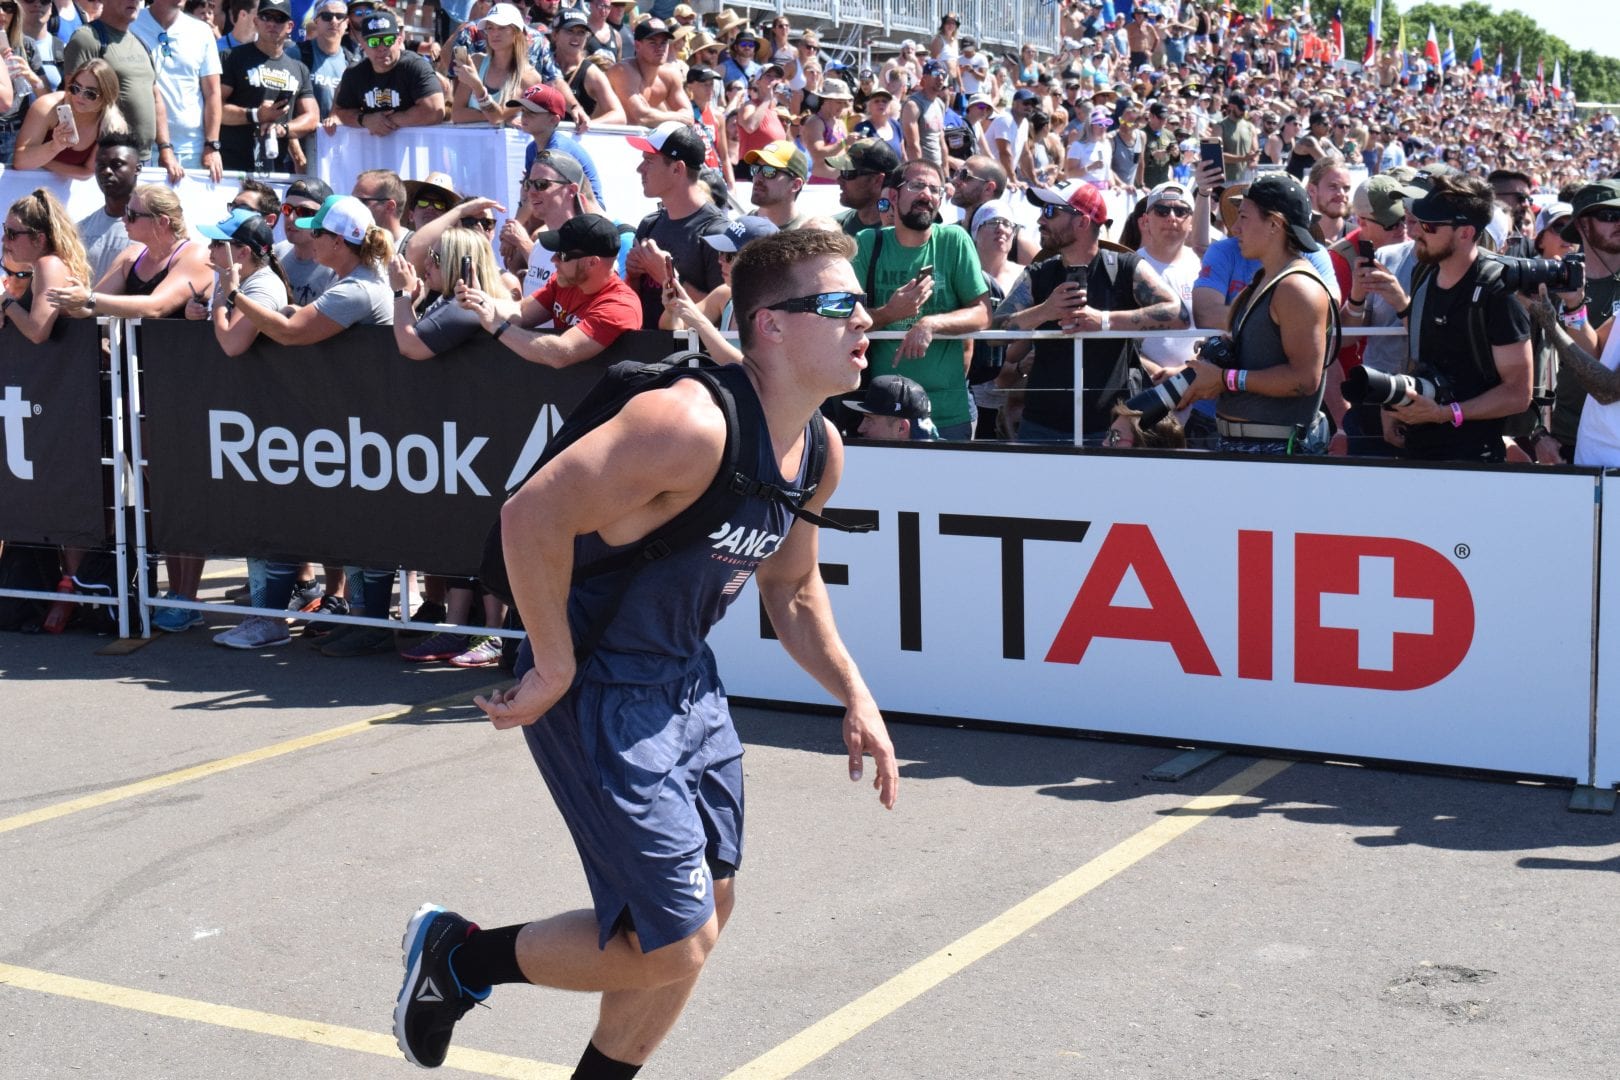 Saxon Panchik completes the Ruck Run event at the 2019 CrossFit Games.